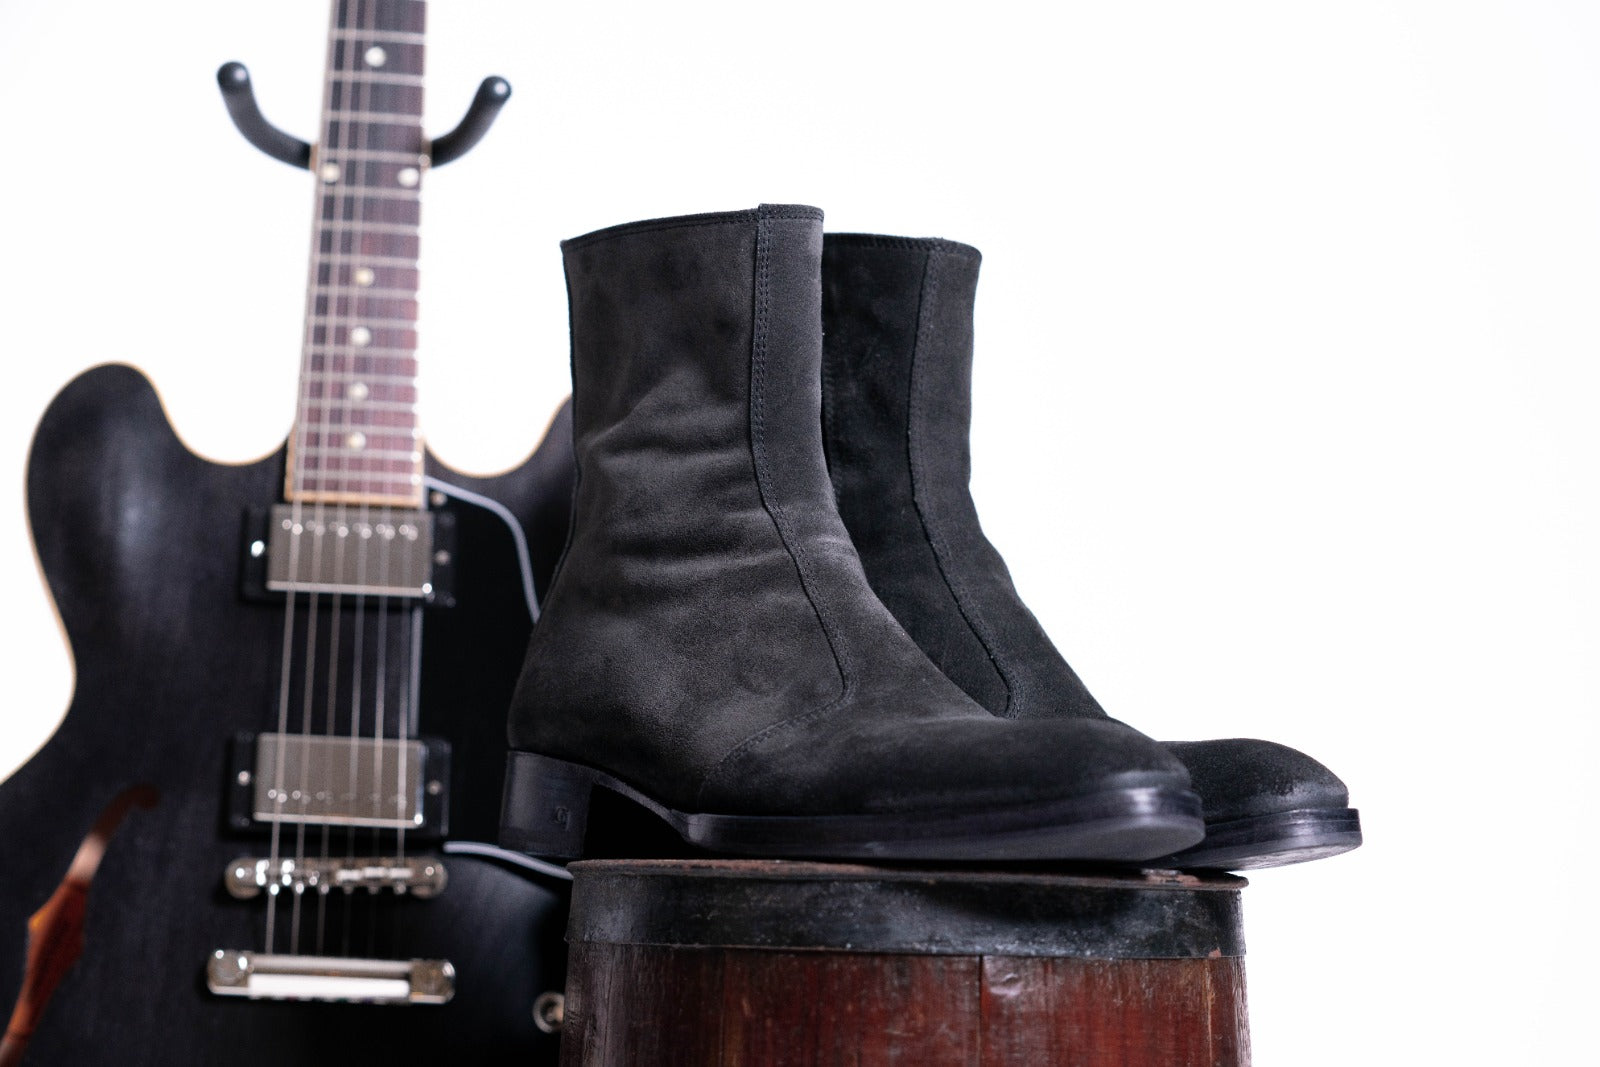 rival sons, rival sons boots, starbenders, starbenders boots, The Morrison Boot, Handmade boots, NY Boots, NYC Boots for men, Rock and Roll Boots for men, leather boots for men, Suede Boots for men, fashion boots for men, handmade boots for men